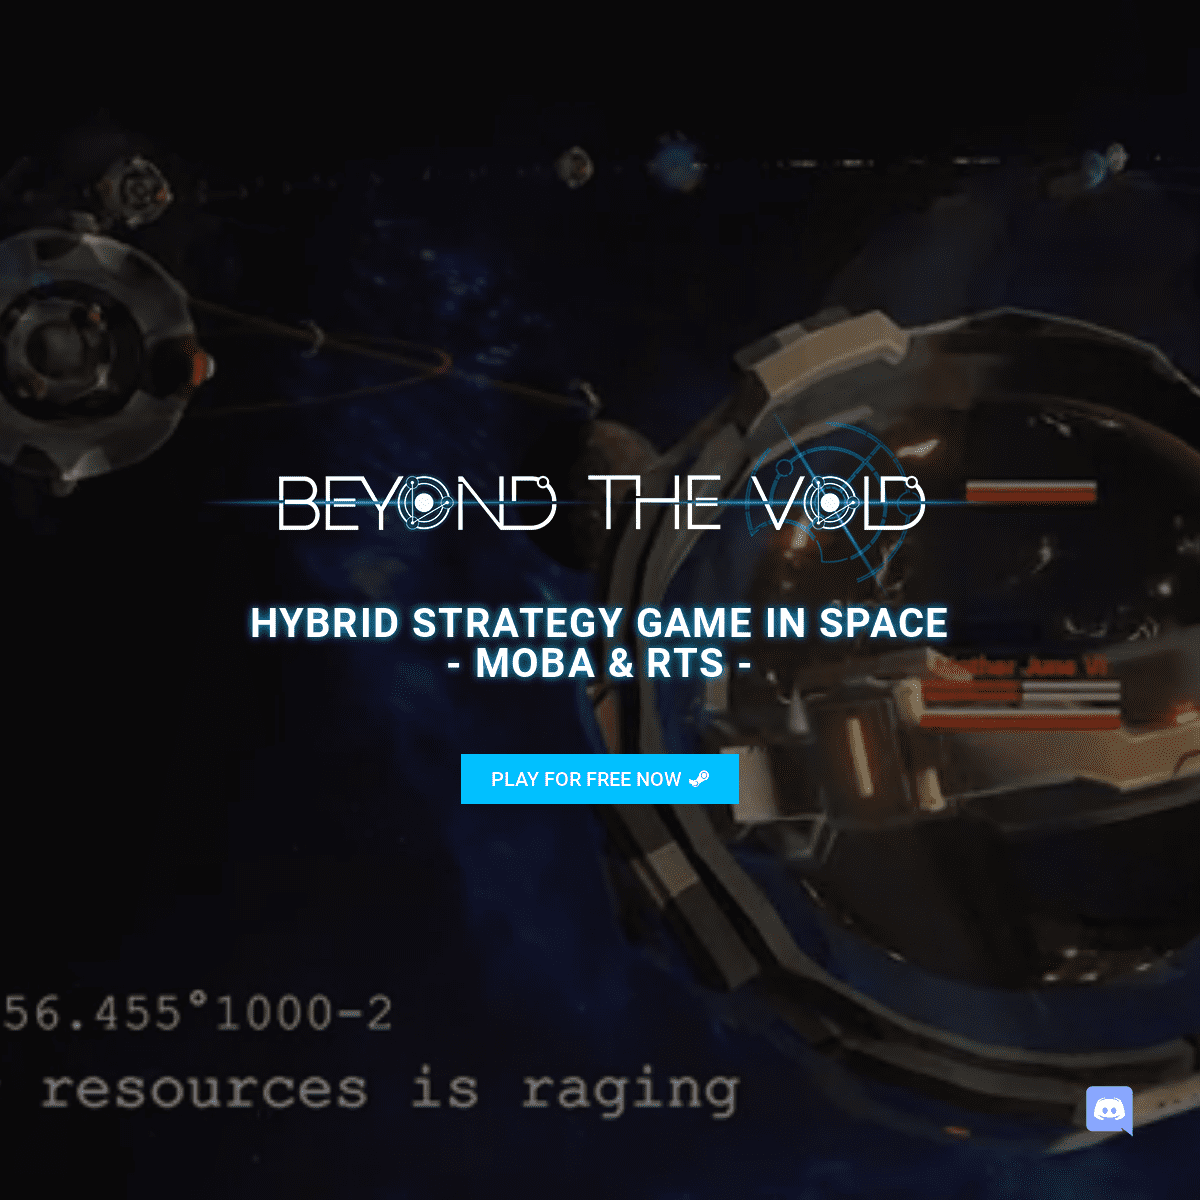 Beyond The Void | Hybrid Strategy Game in Space on PC | Play for free